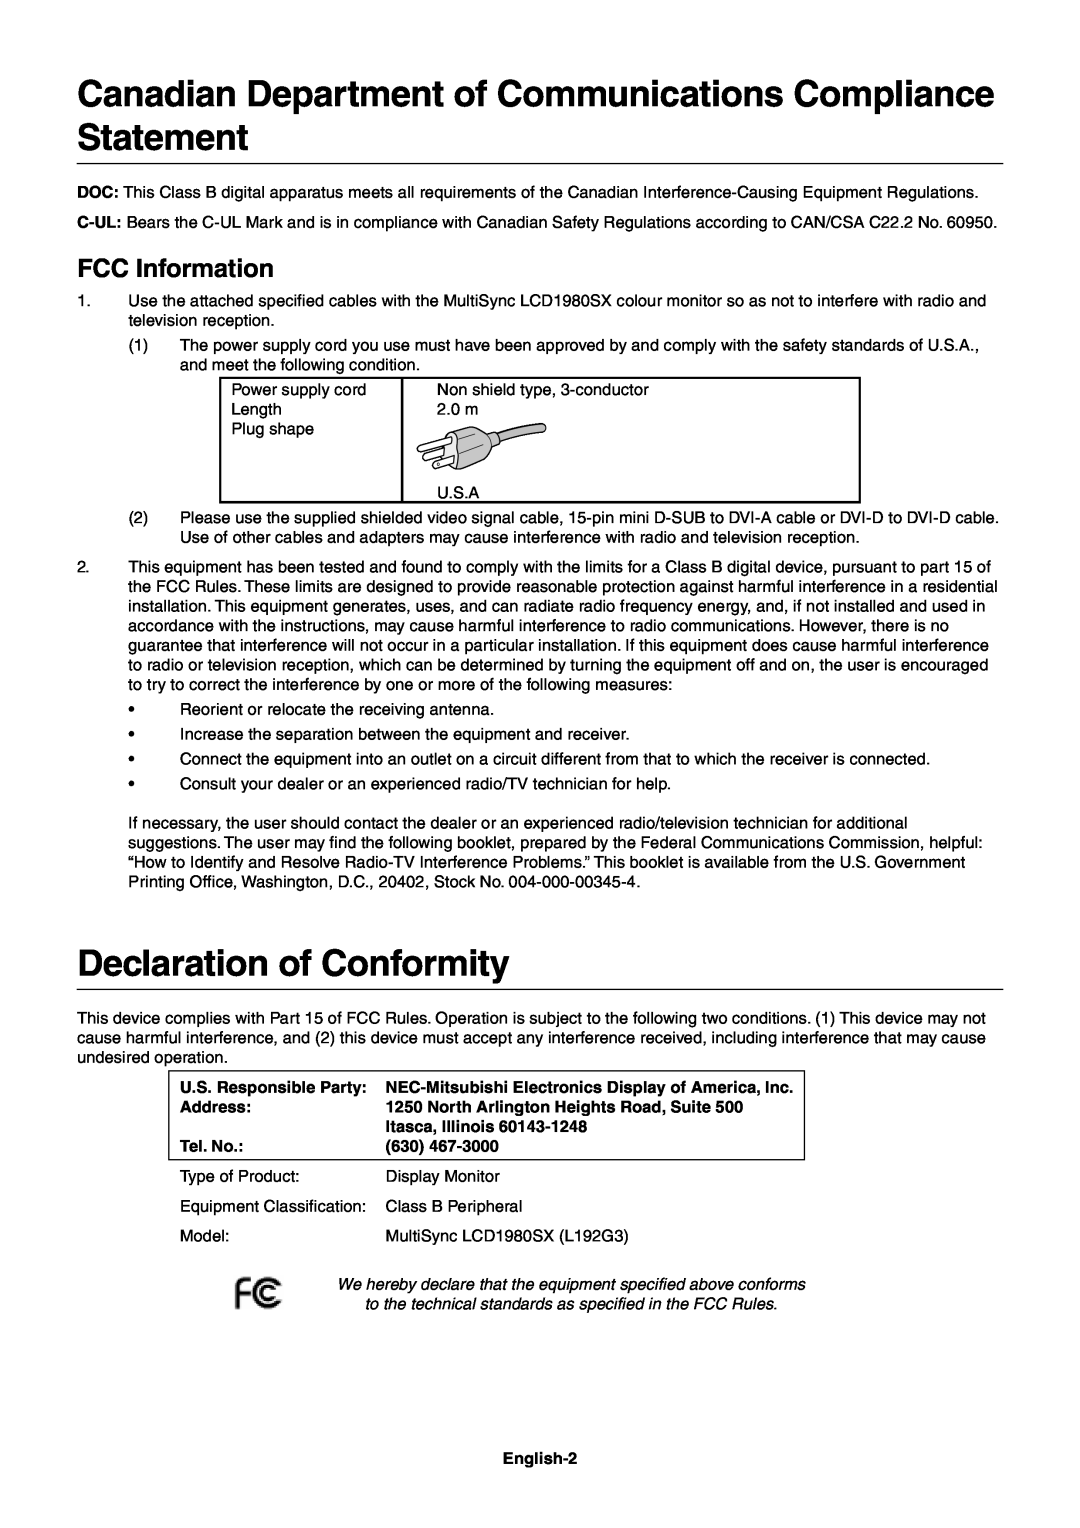 NEC LCD1980SX Canadian Department of Communications Compliance Statement, Declaration of Conformity, FCC Information 